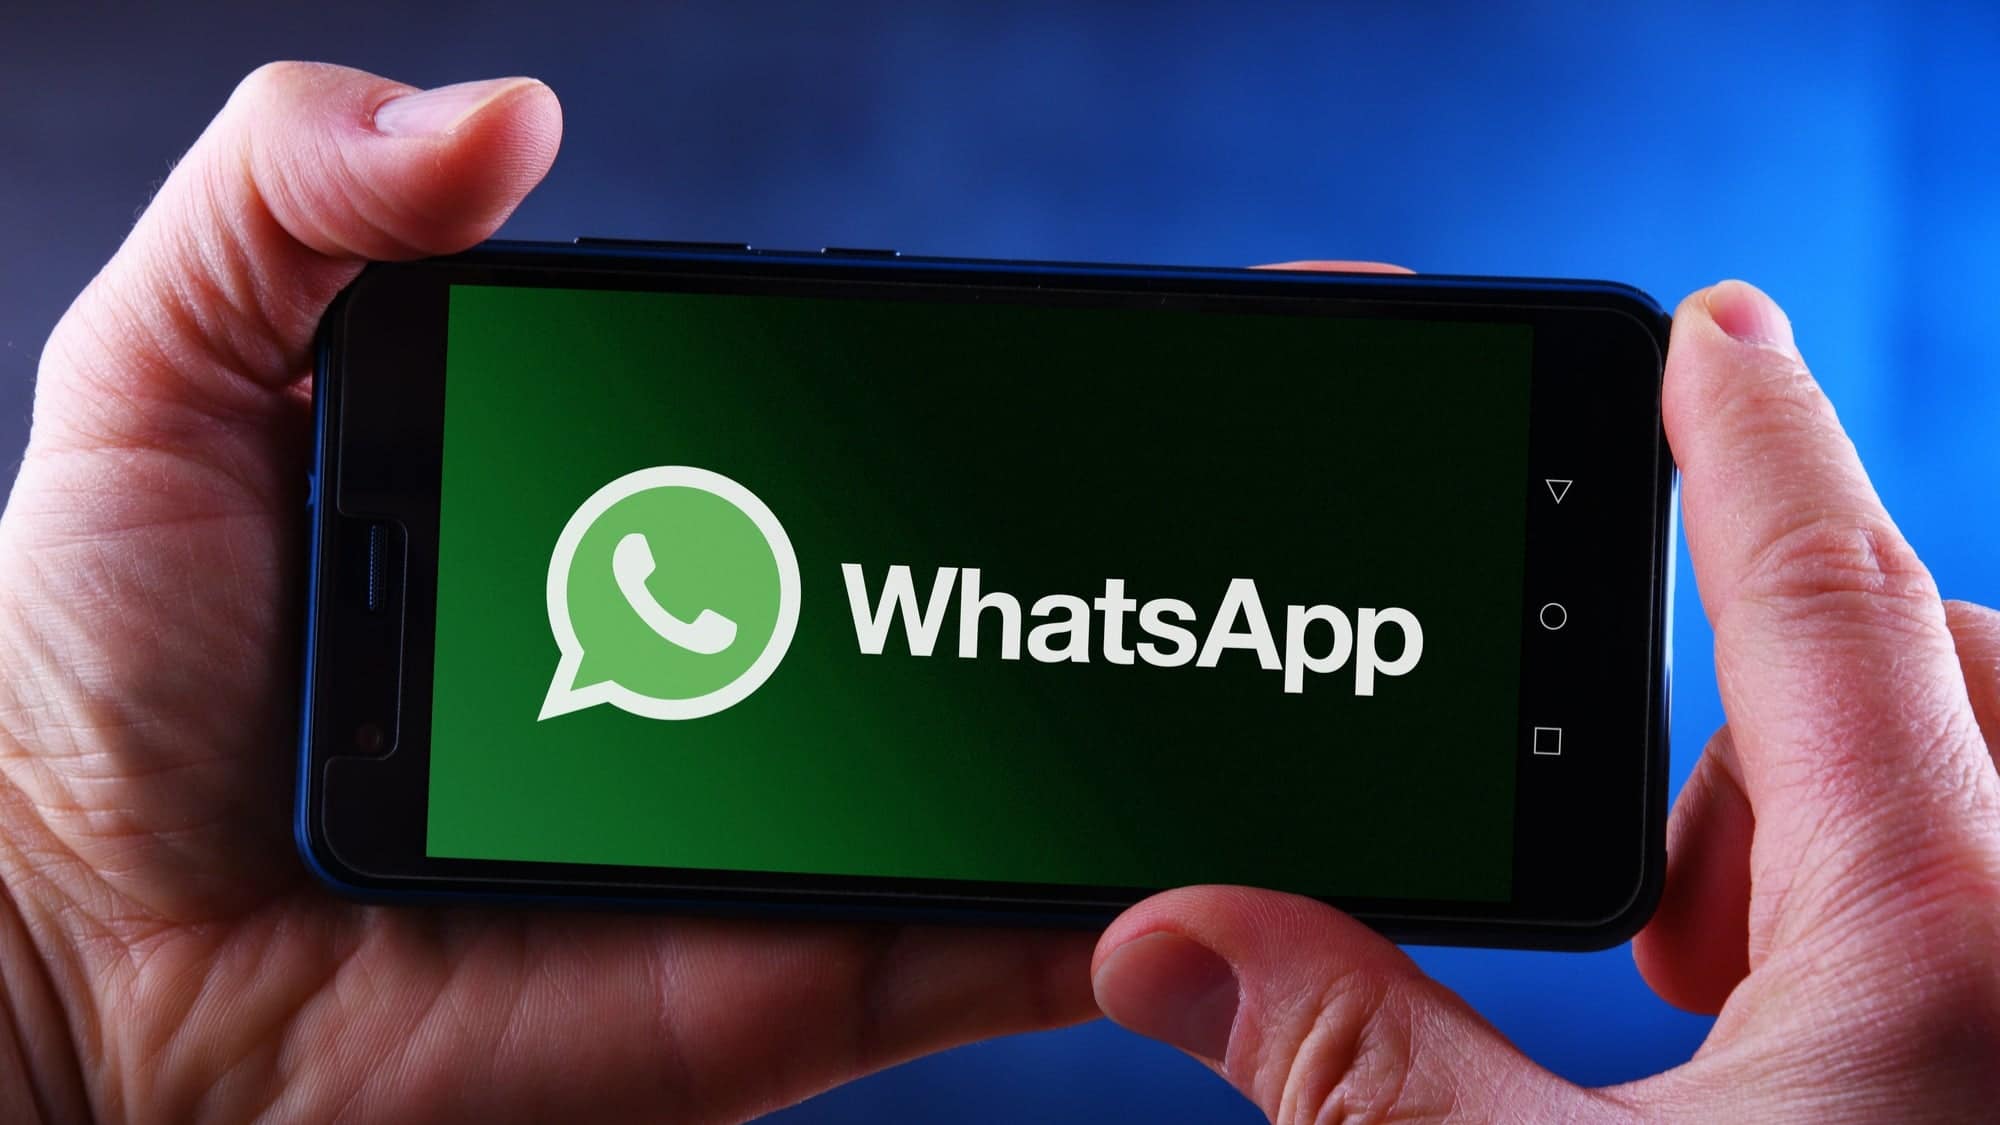 Goodbye WhatsApp .. The most powerful and secure WhatsApp competitor announces good news for users and millions rush to it 1 8/10/2021 - 6:33 PM